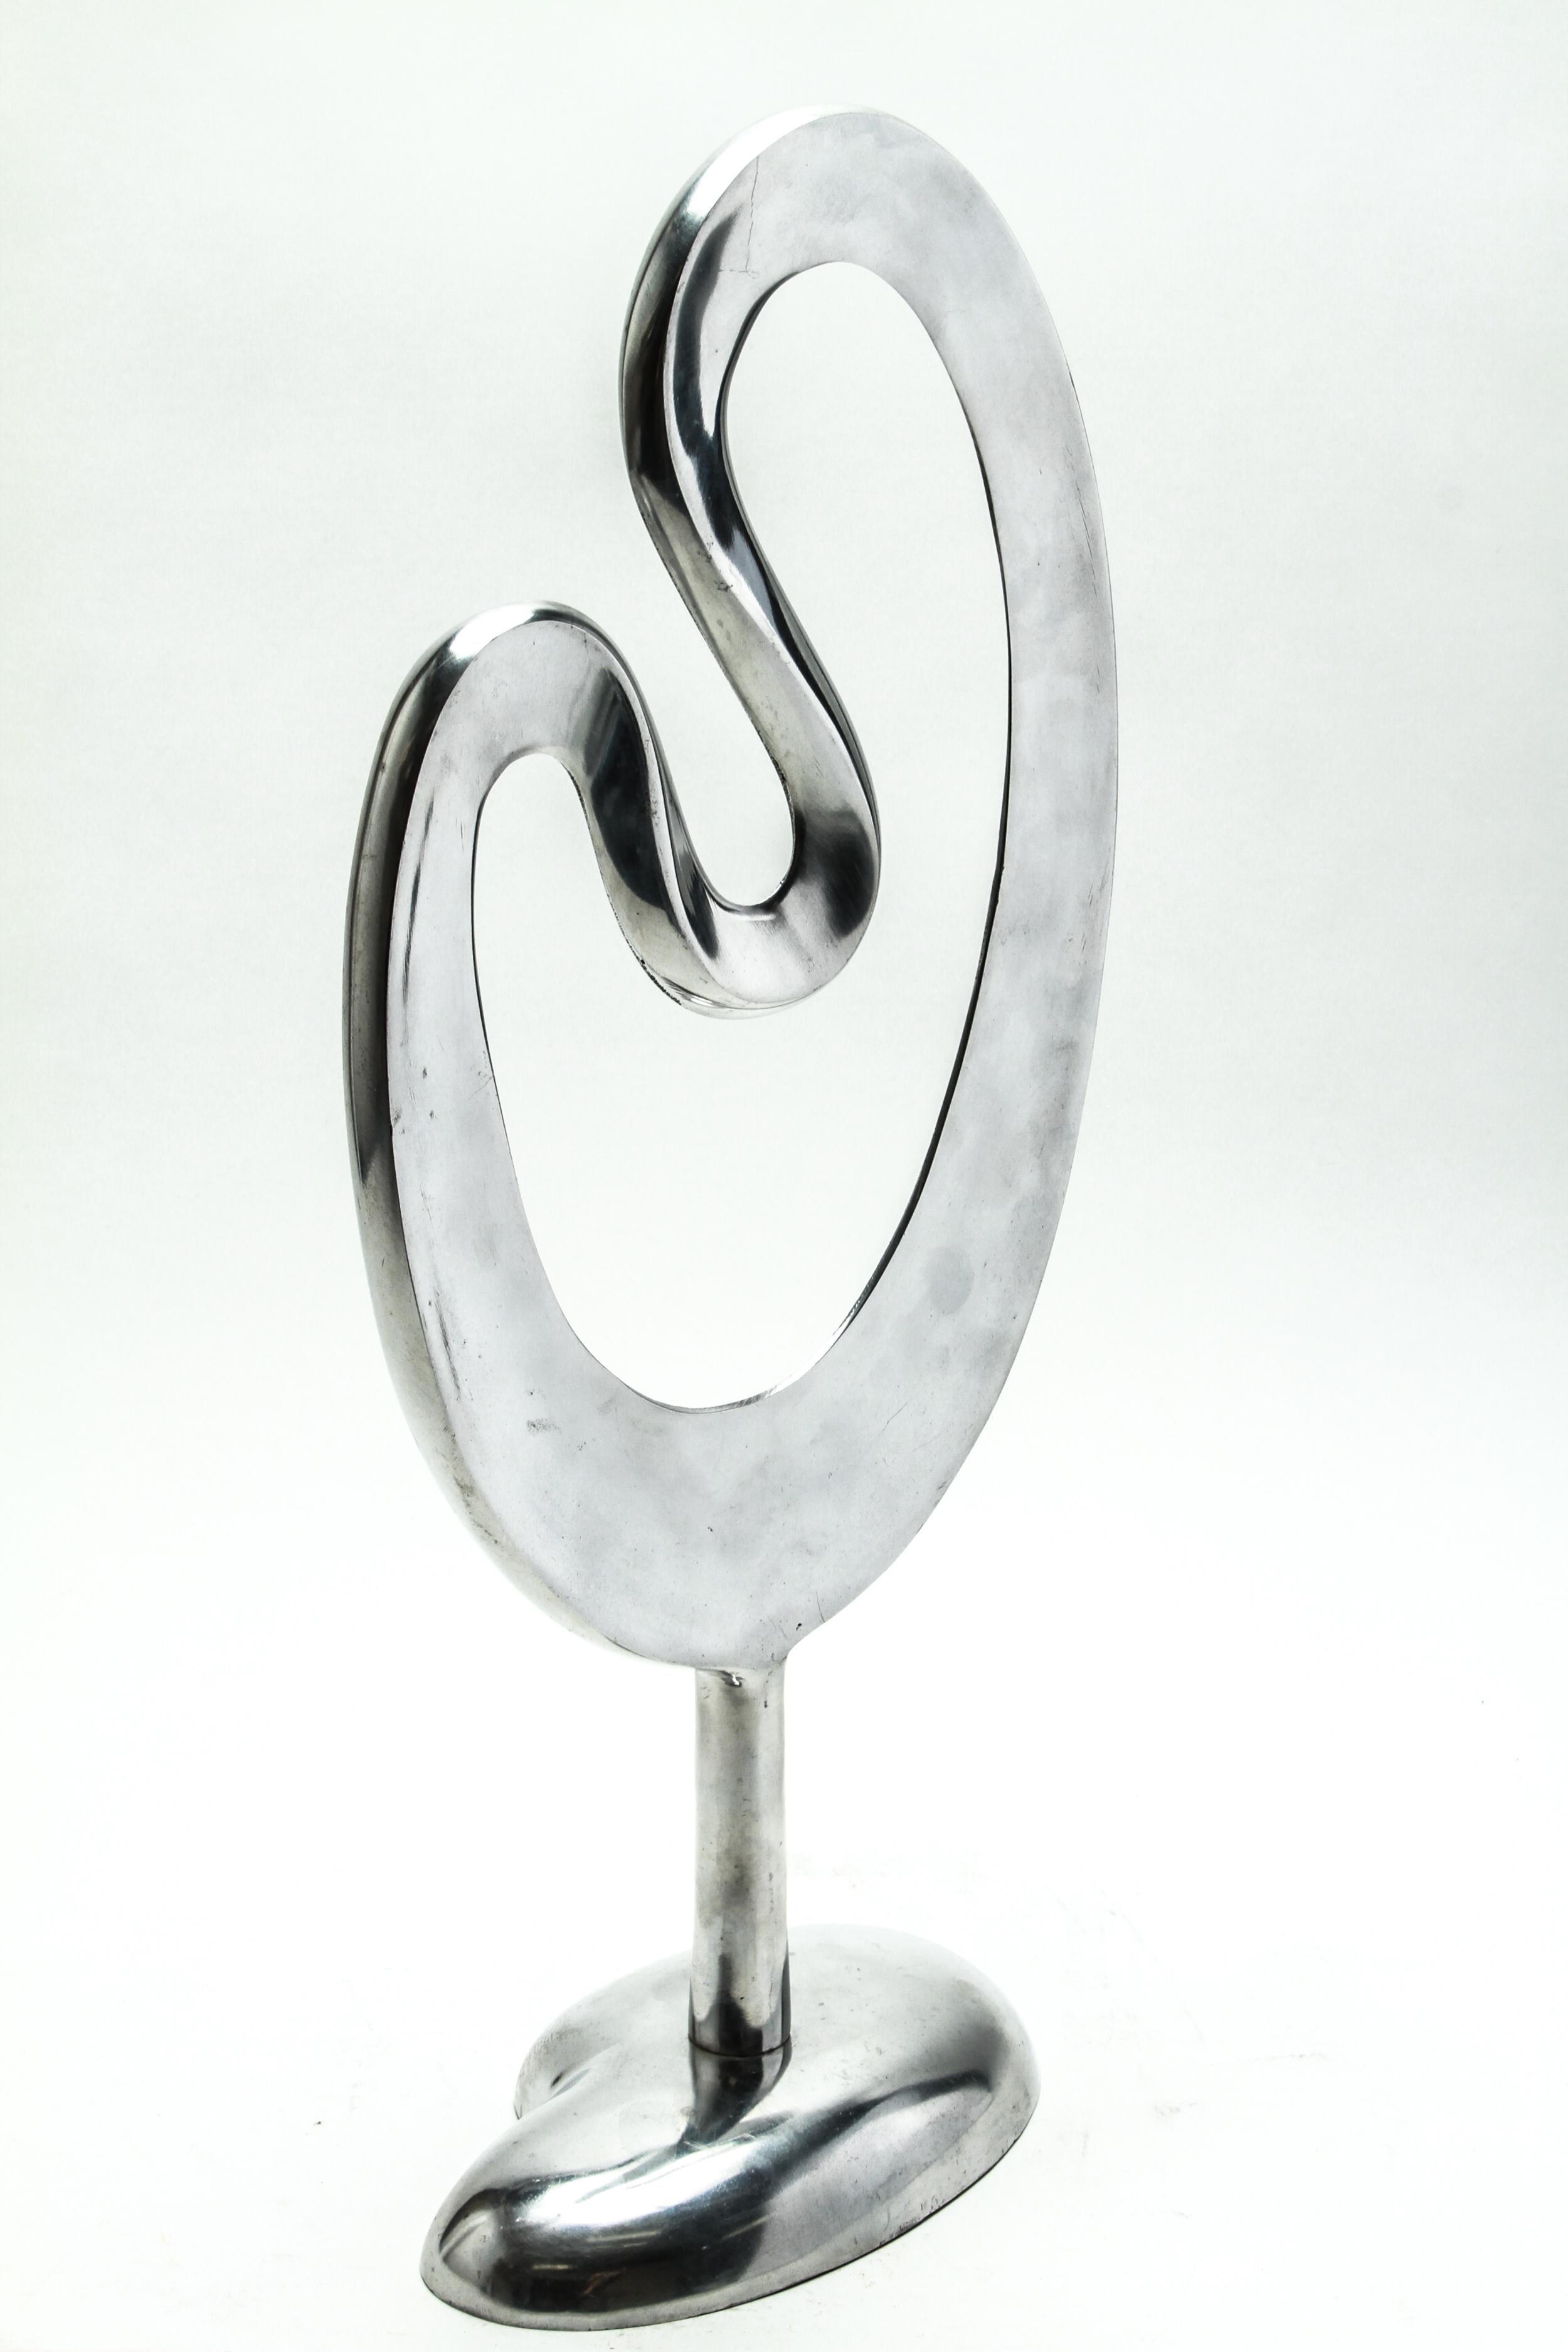 Modernist chromed aluminum biomorphic tabletop sculpture, in an undulating pierced form atop a columnar base and an oval foot. The piece is in great vintage condition with some minor age-appropriate wear.